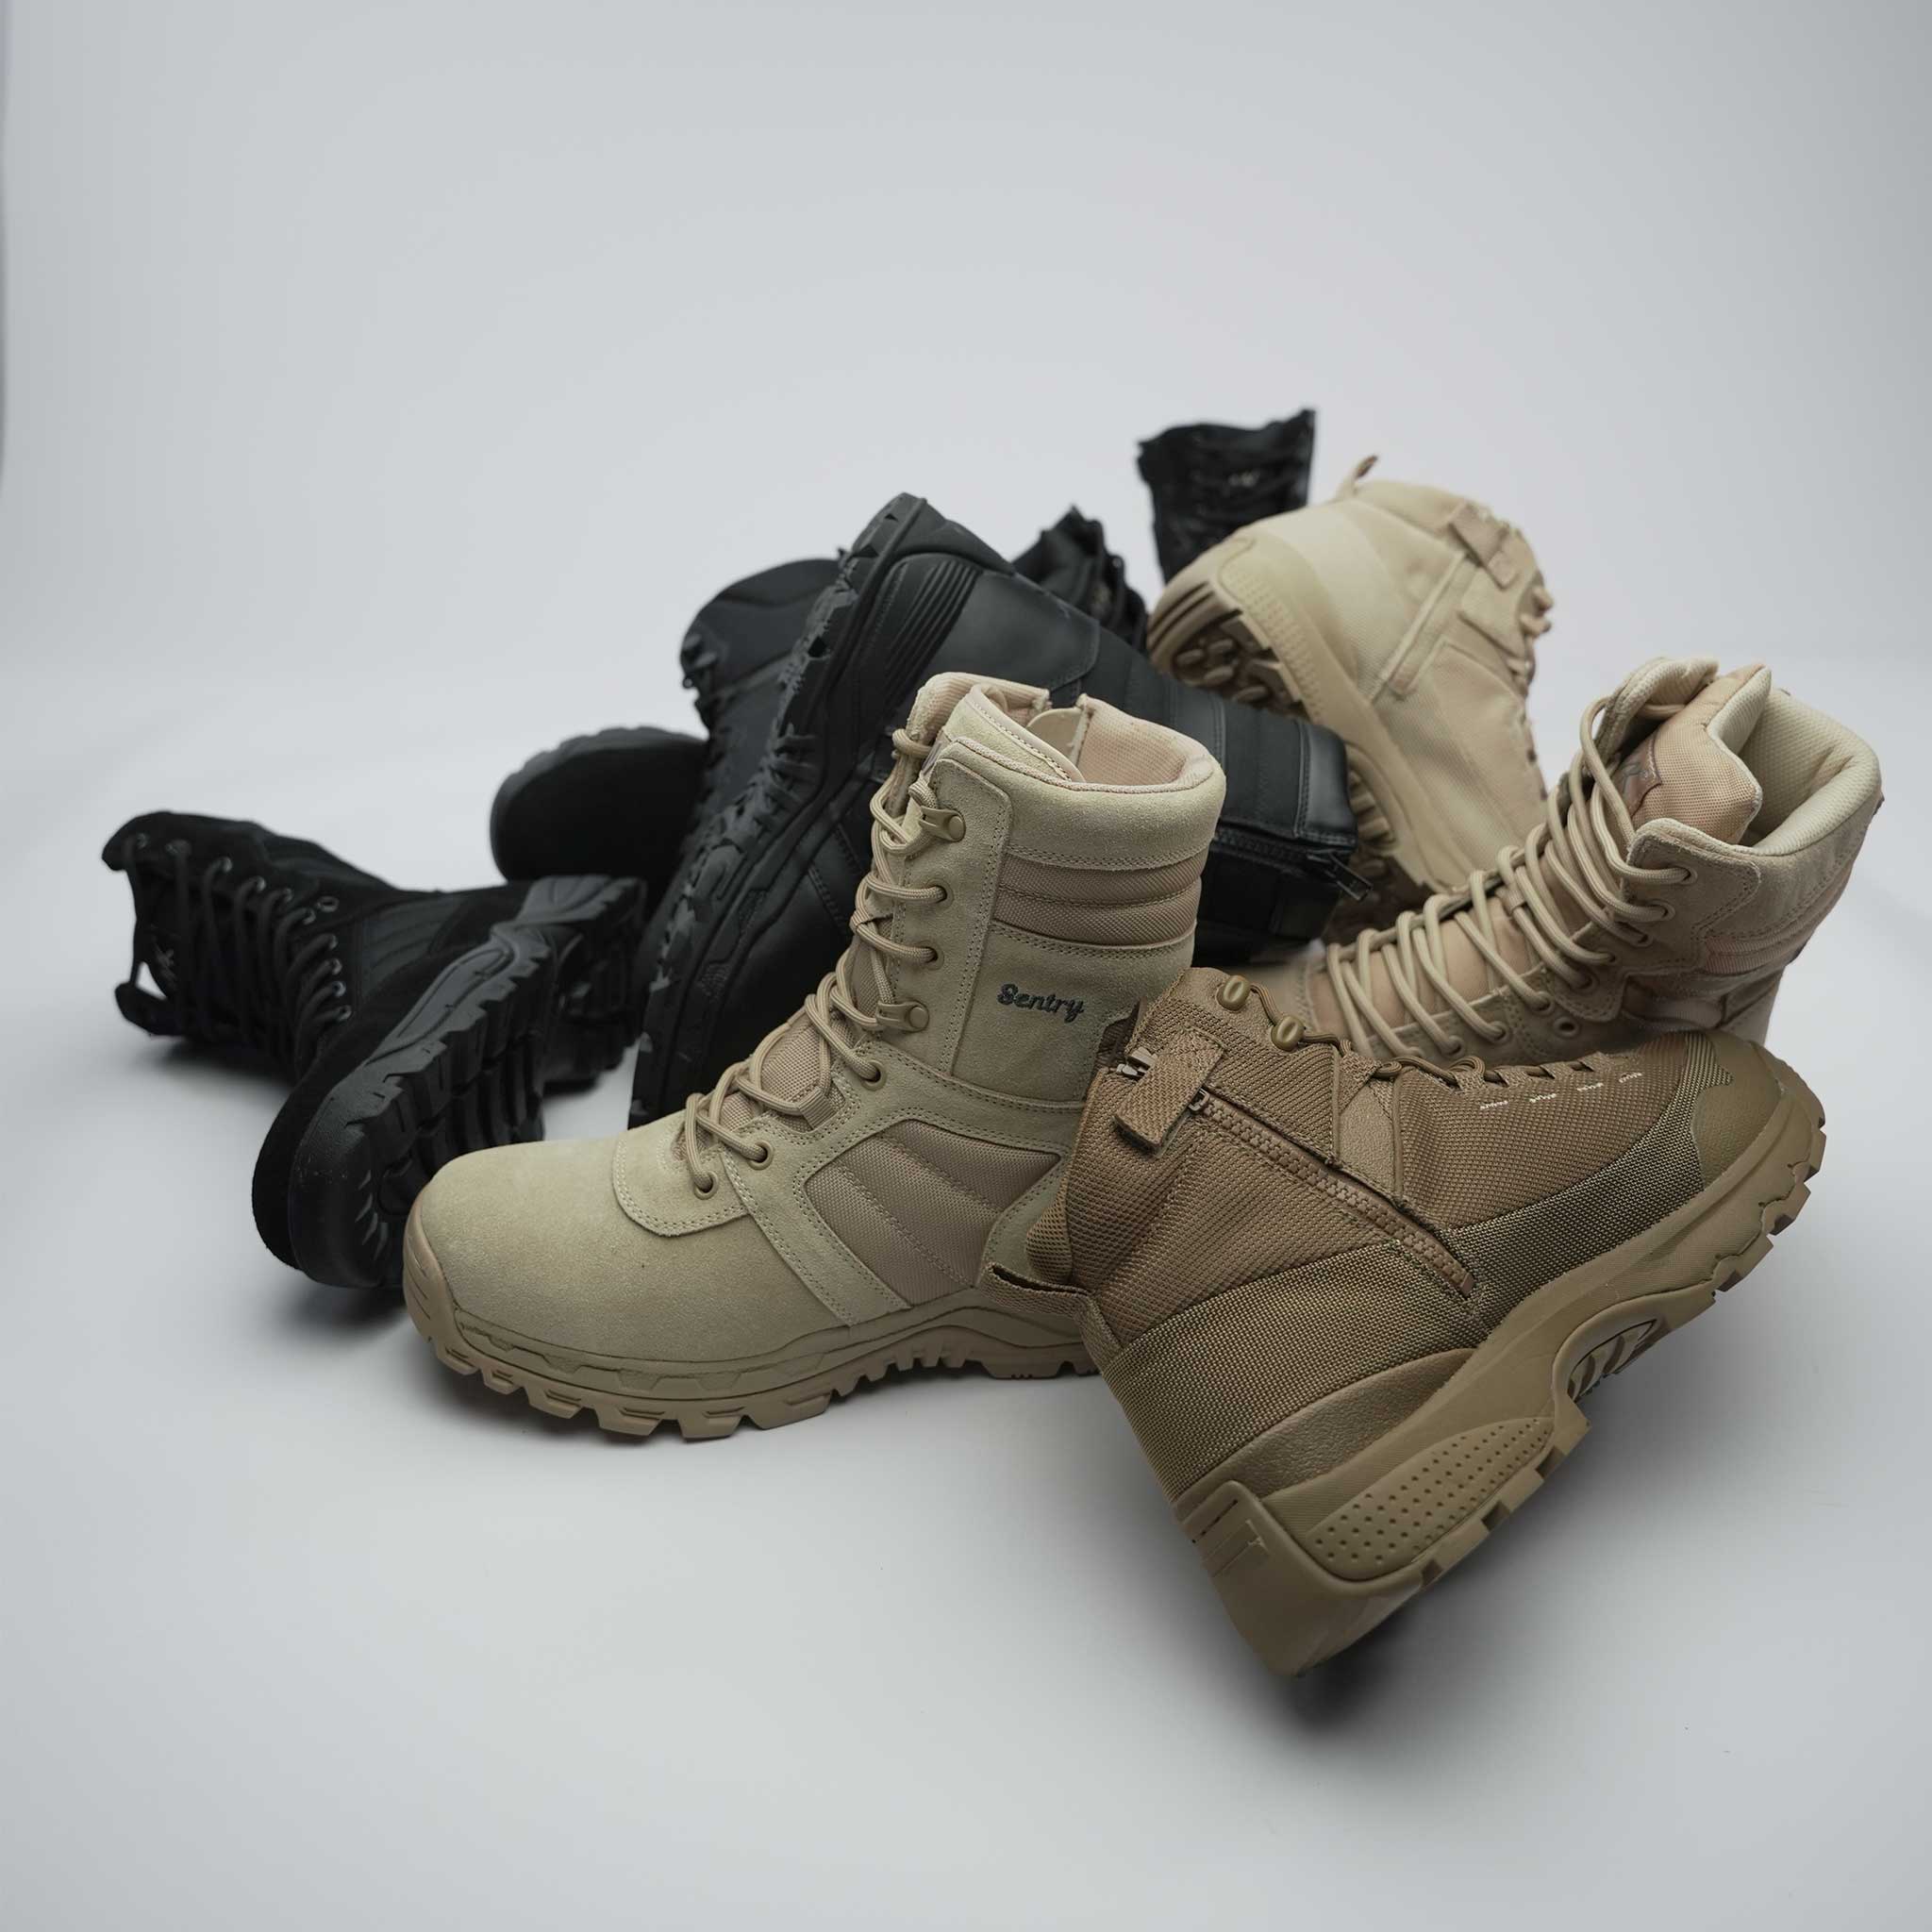 a view of a pile of mak military and combat boots